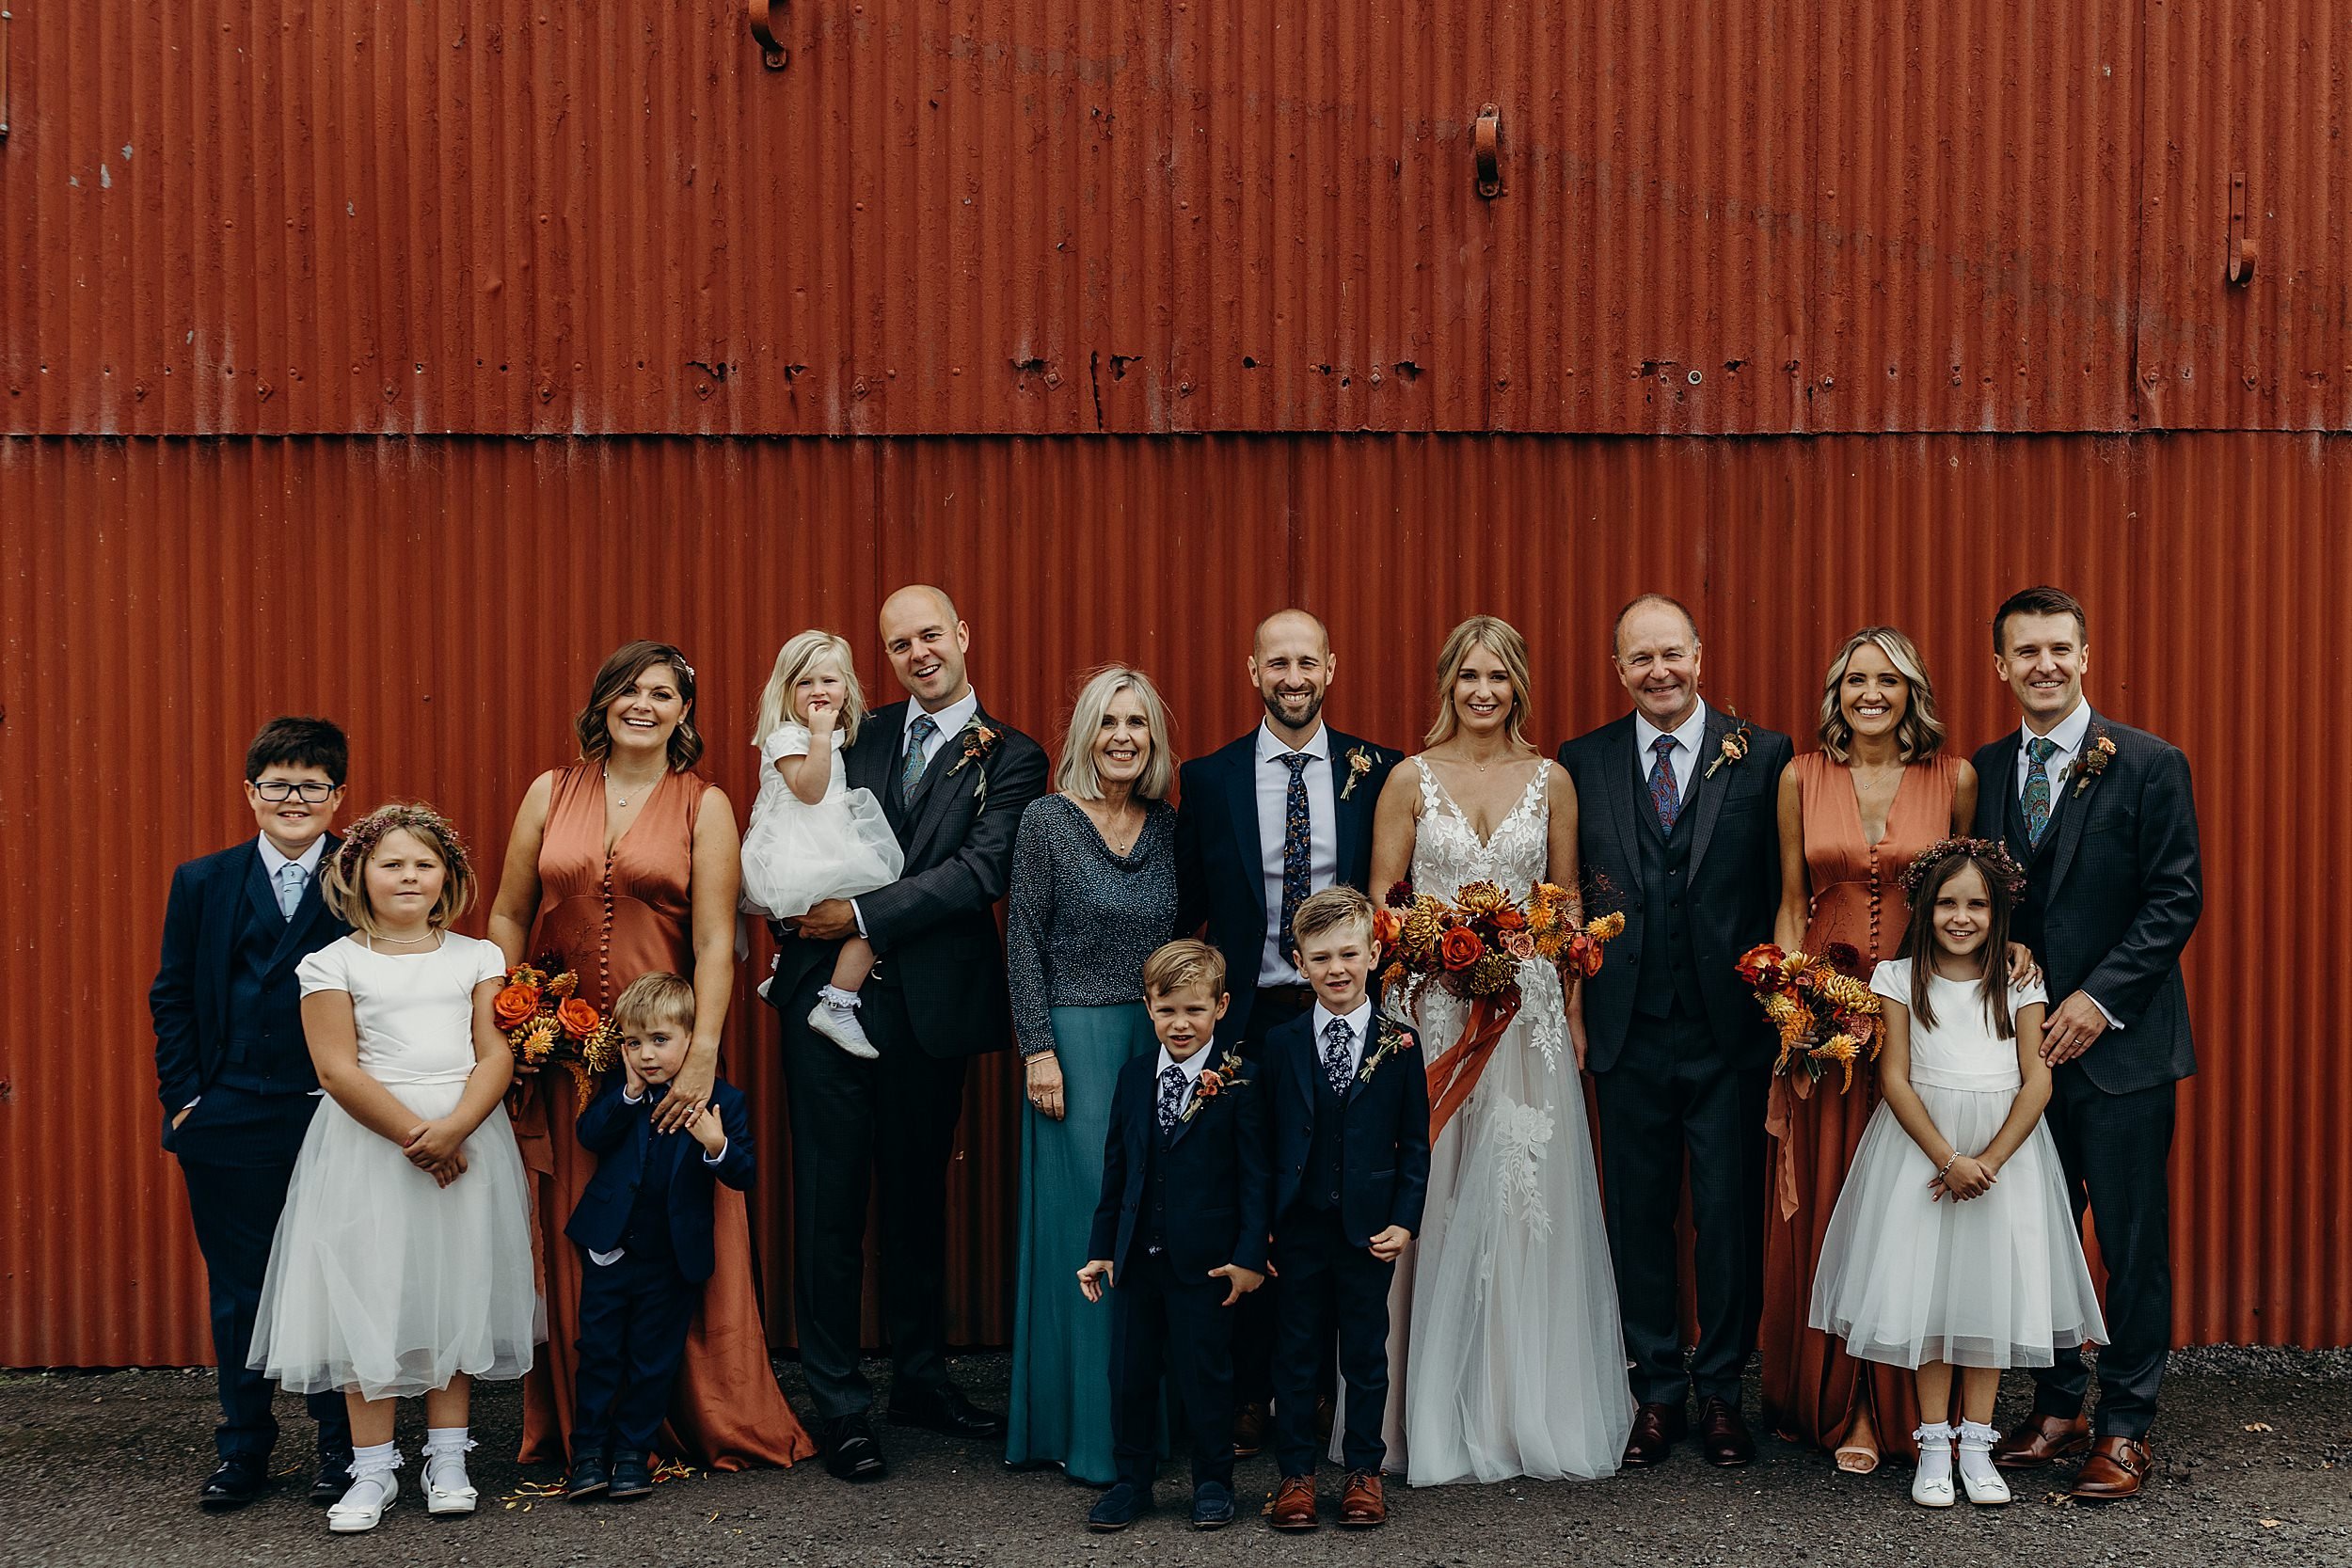 dalduff farm wedding photos showing bride and groom with family standing in front of red barn at dalduff barn a quirky wedding venue in scotland